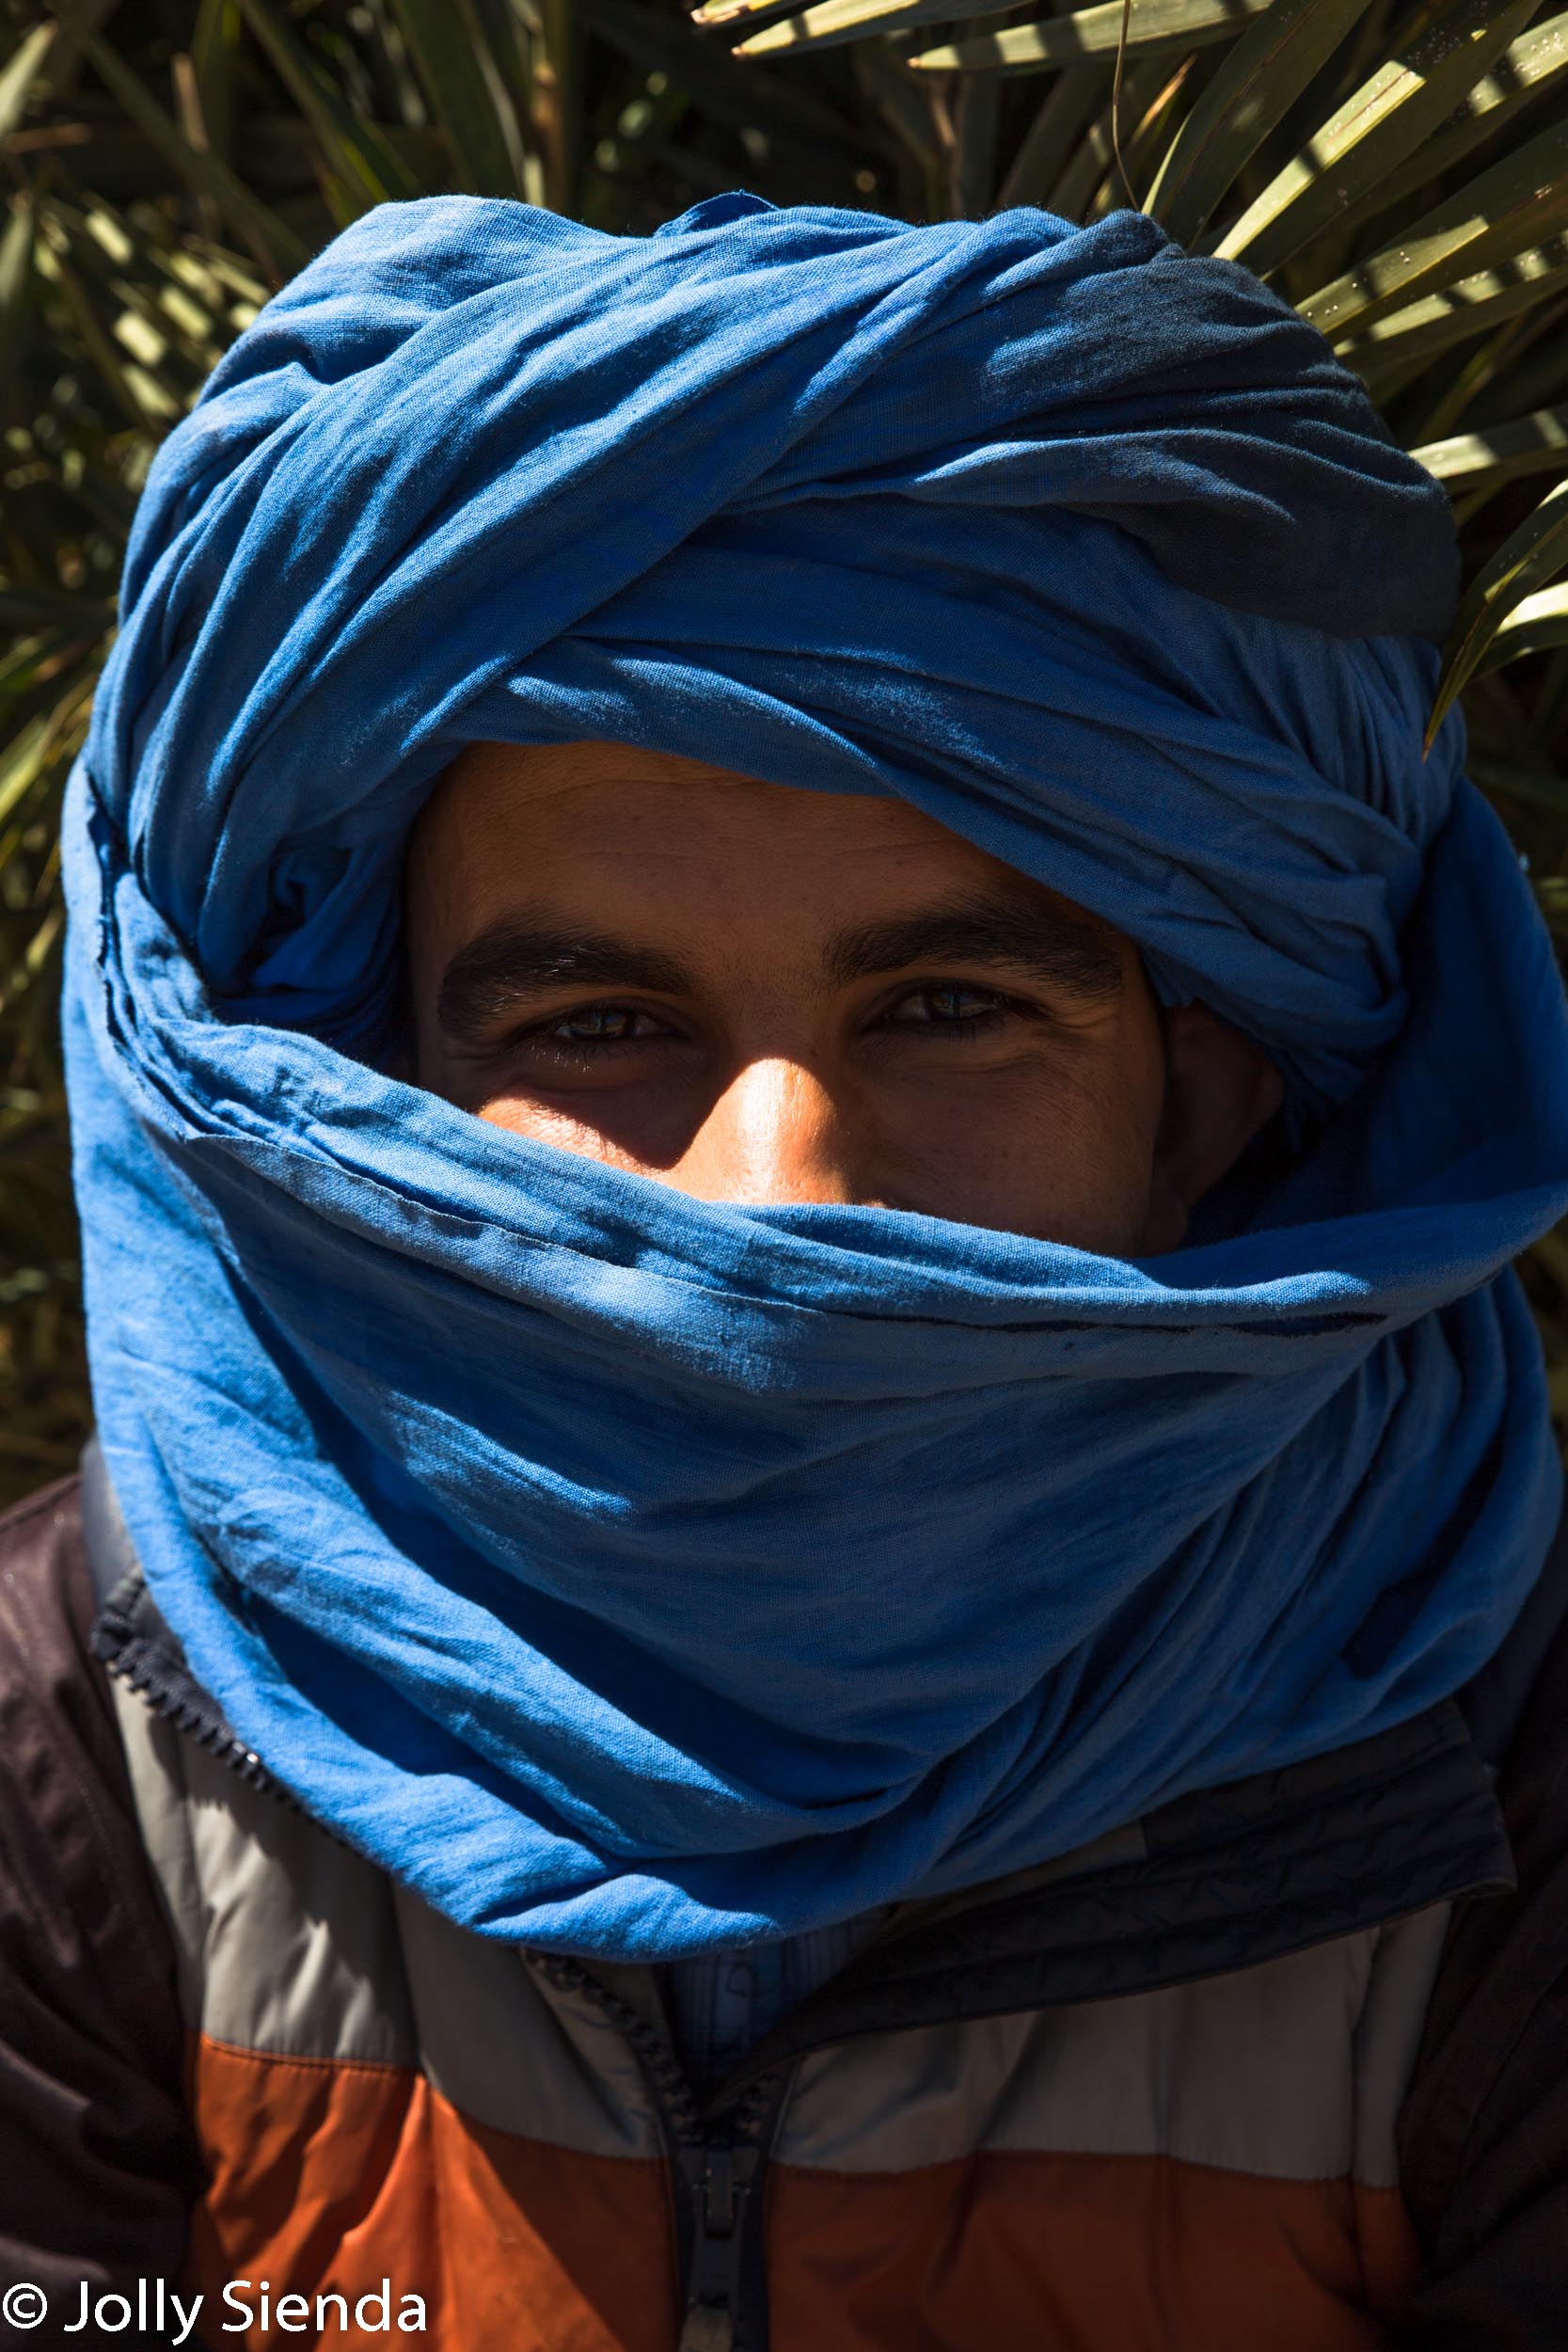 Young Berber man in the blue turban